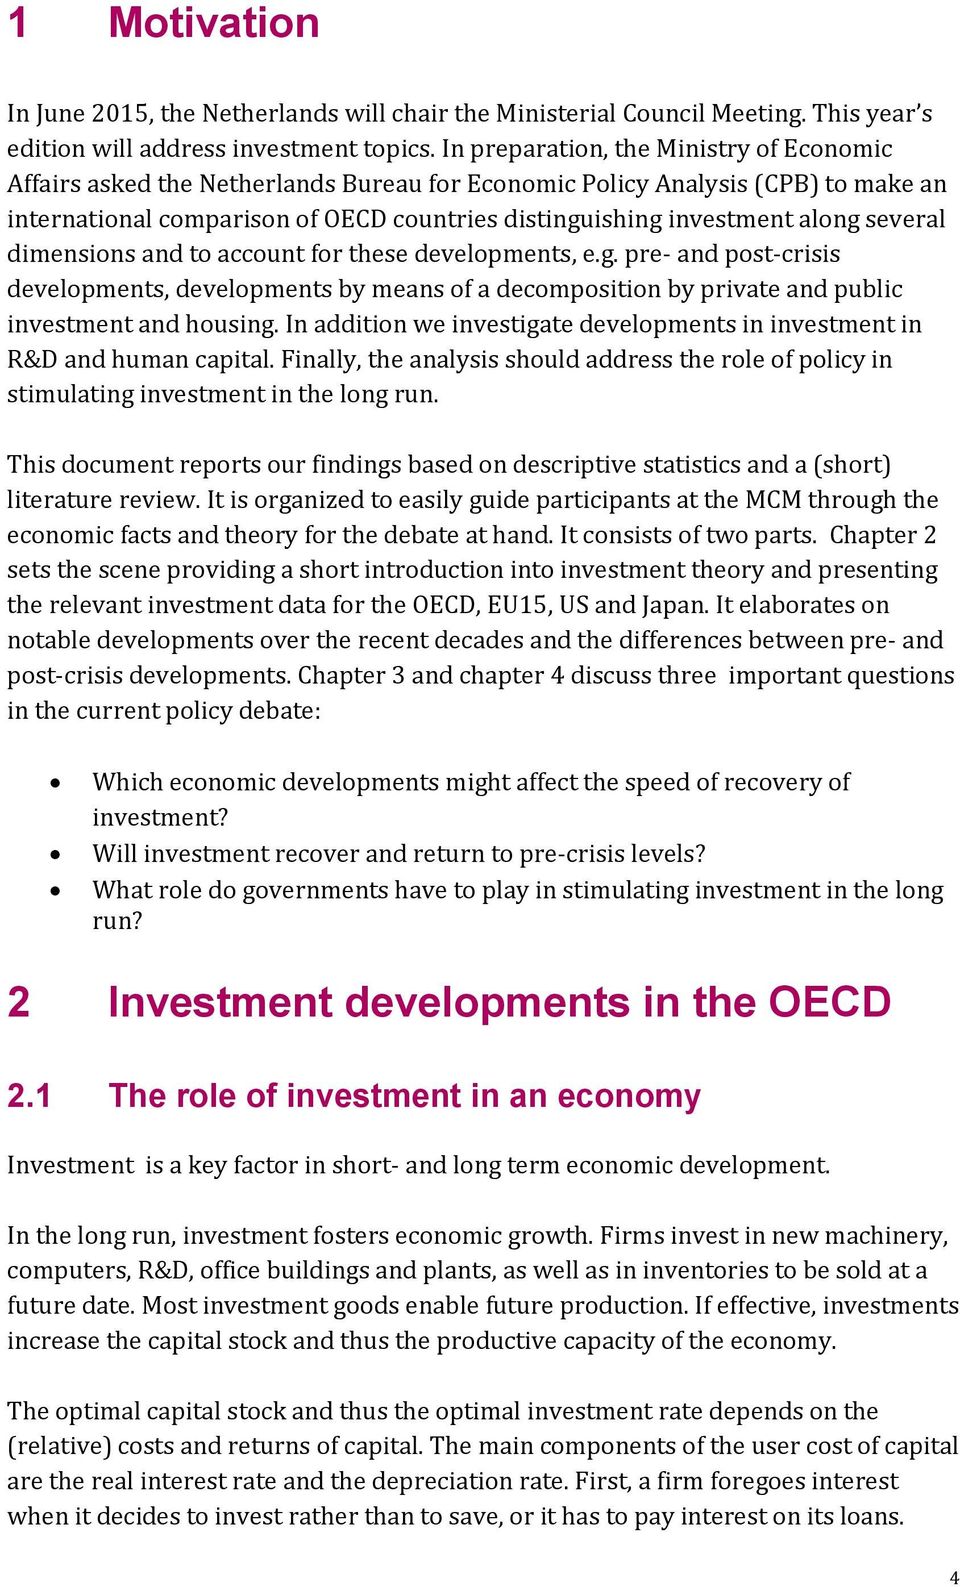 several dimensions and to account for these developments, e.g. pre- and post-crisis developments, developments by means of a decomposition by private and public investment and housing.